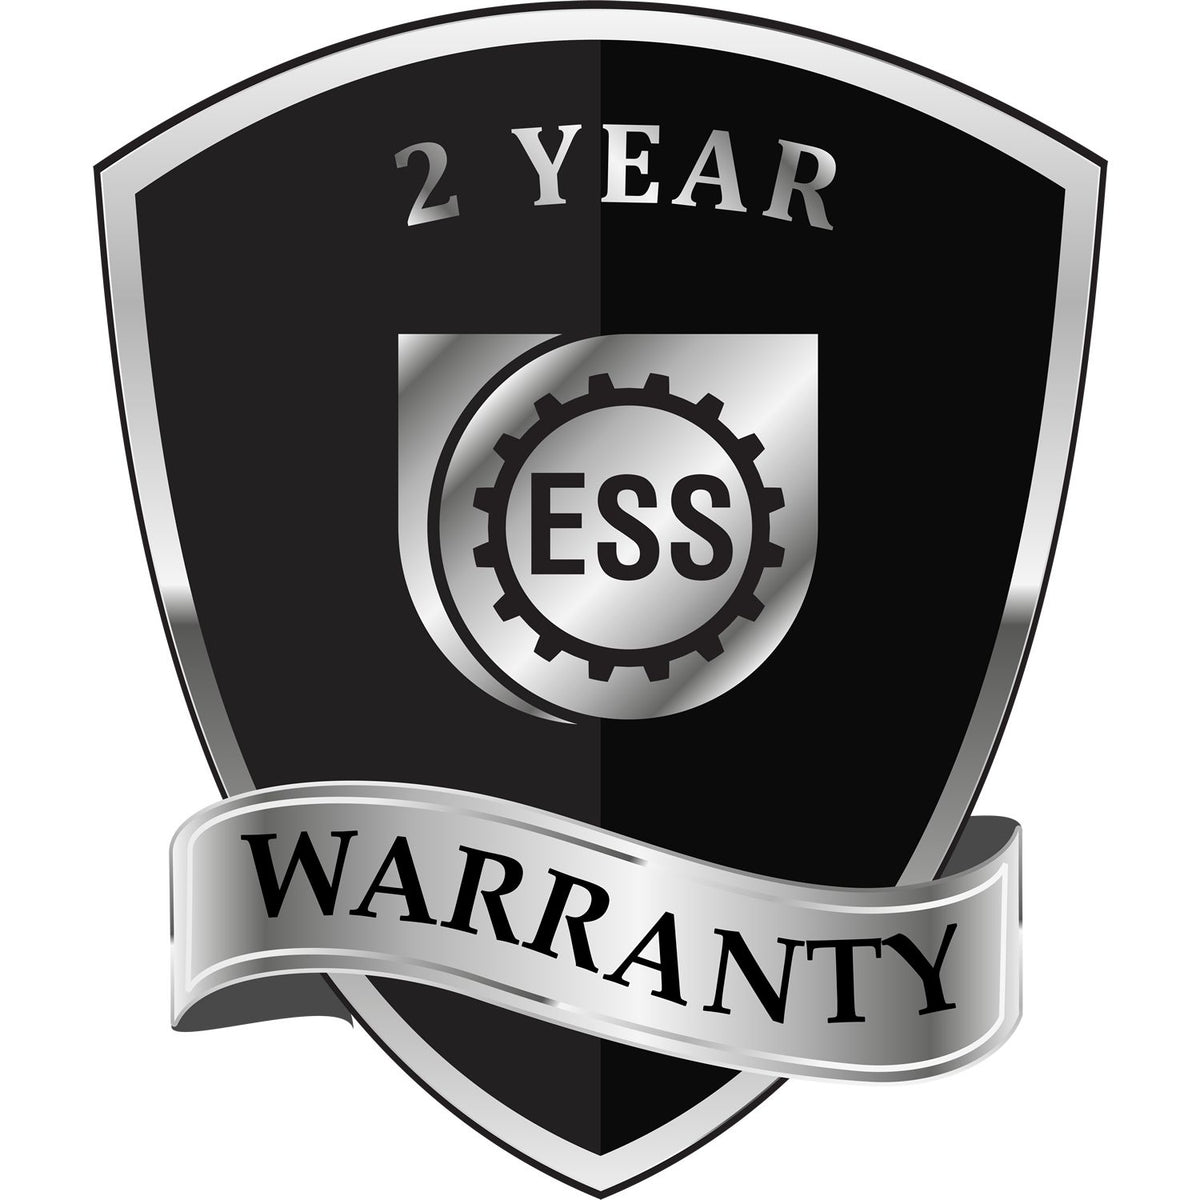 A black and silver badge or emblem showing warranty information for the Long Reach Missouri Geology Seal